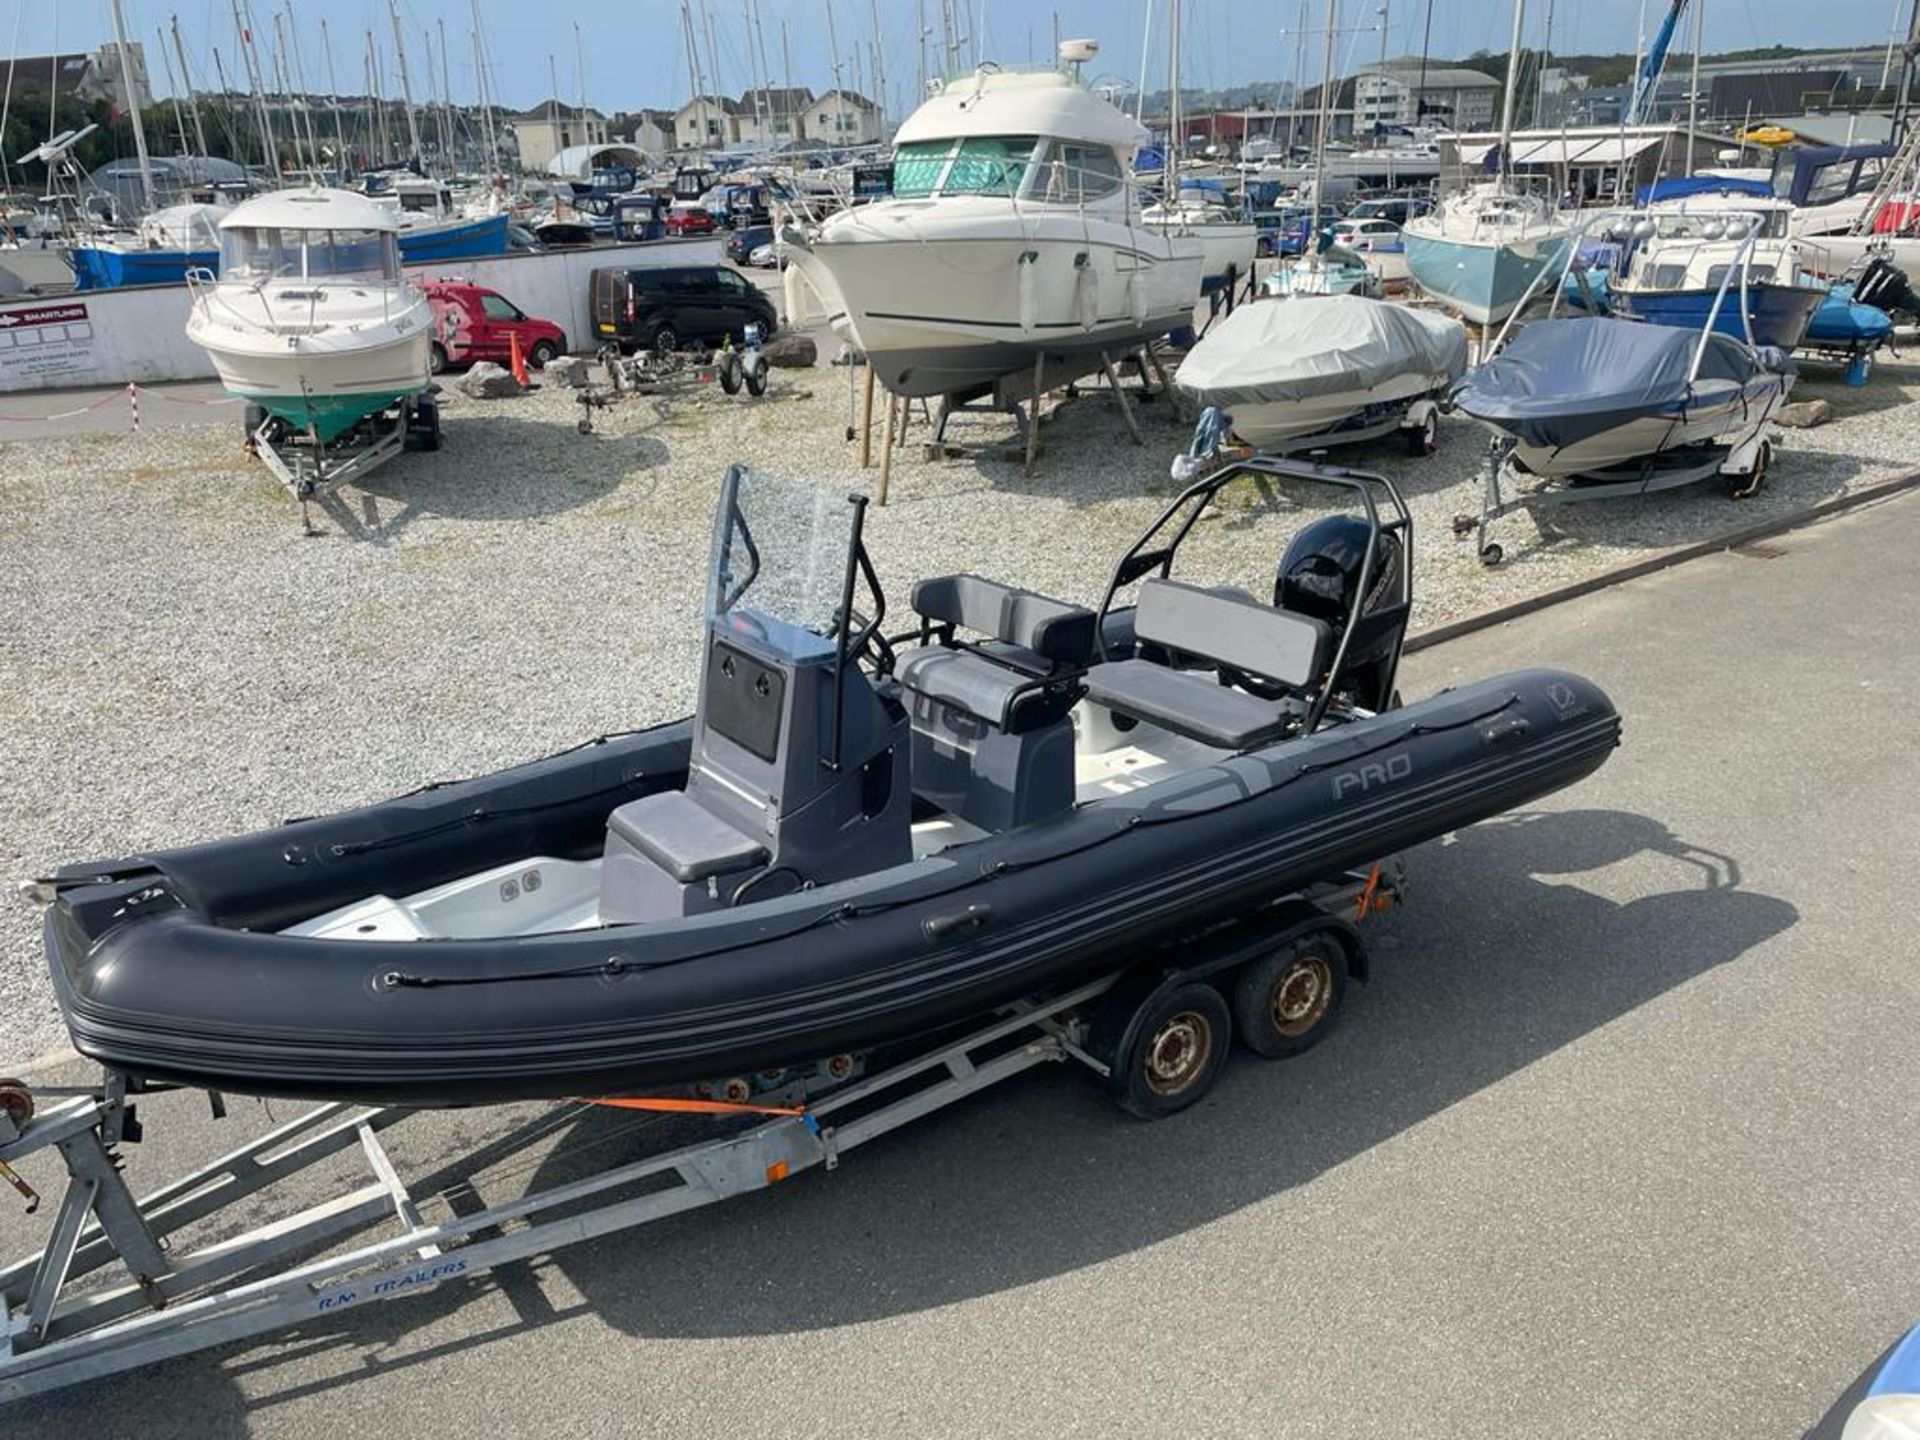 Zodiac 650 Pro rigid inflatable boat with Mercury 150 outboard engine. Includes road trailer. - Image 7 of 14